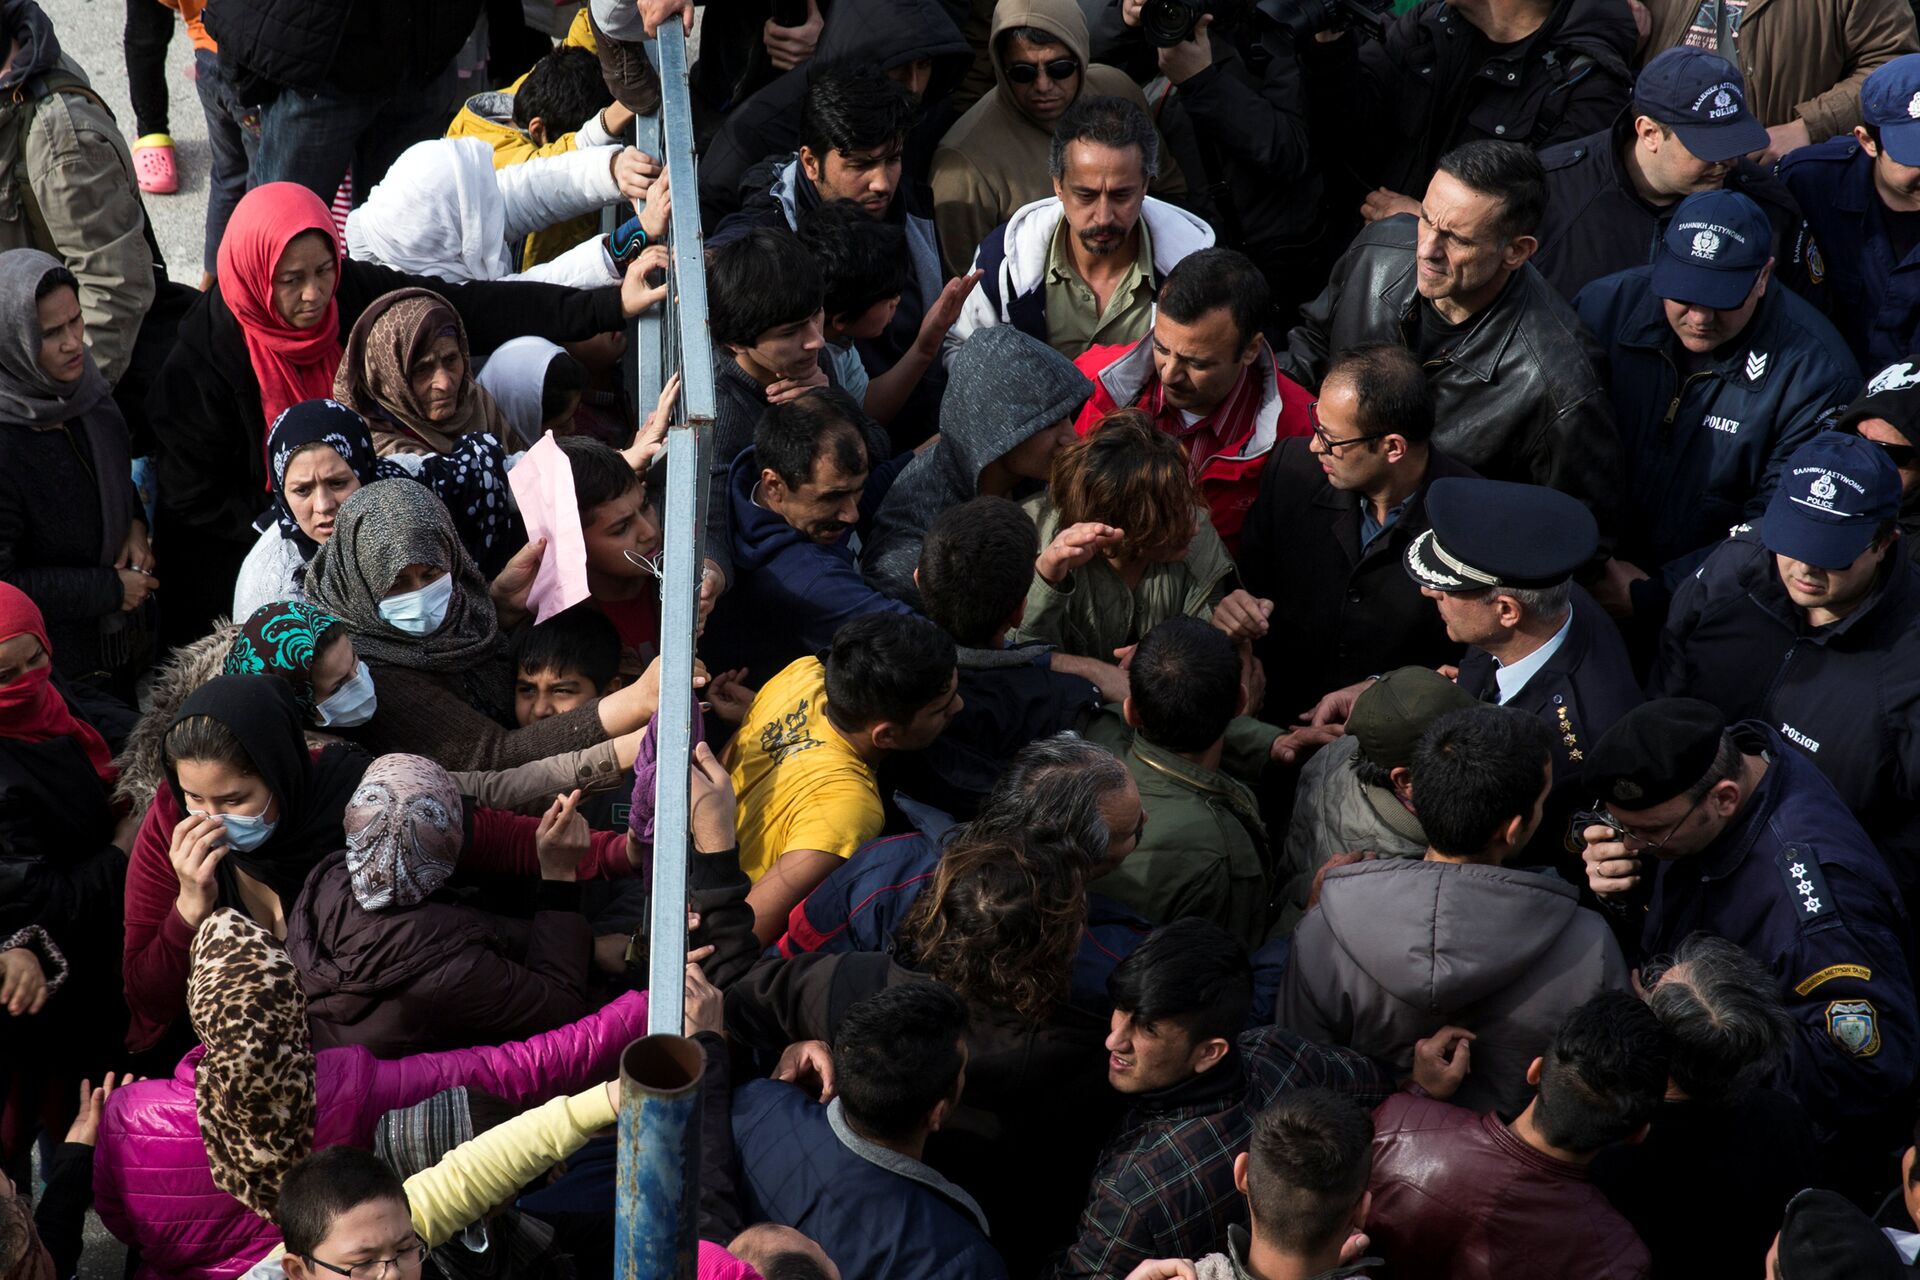 Refugees and migrants, most of them Afghans, block the entrance of the refugee camp at the disused Hellenikon airport as police officers try to disperse them, in Athens, Greece, February 6, 2017 - Sputnik International, 1920, 27.10.2021